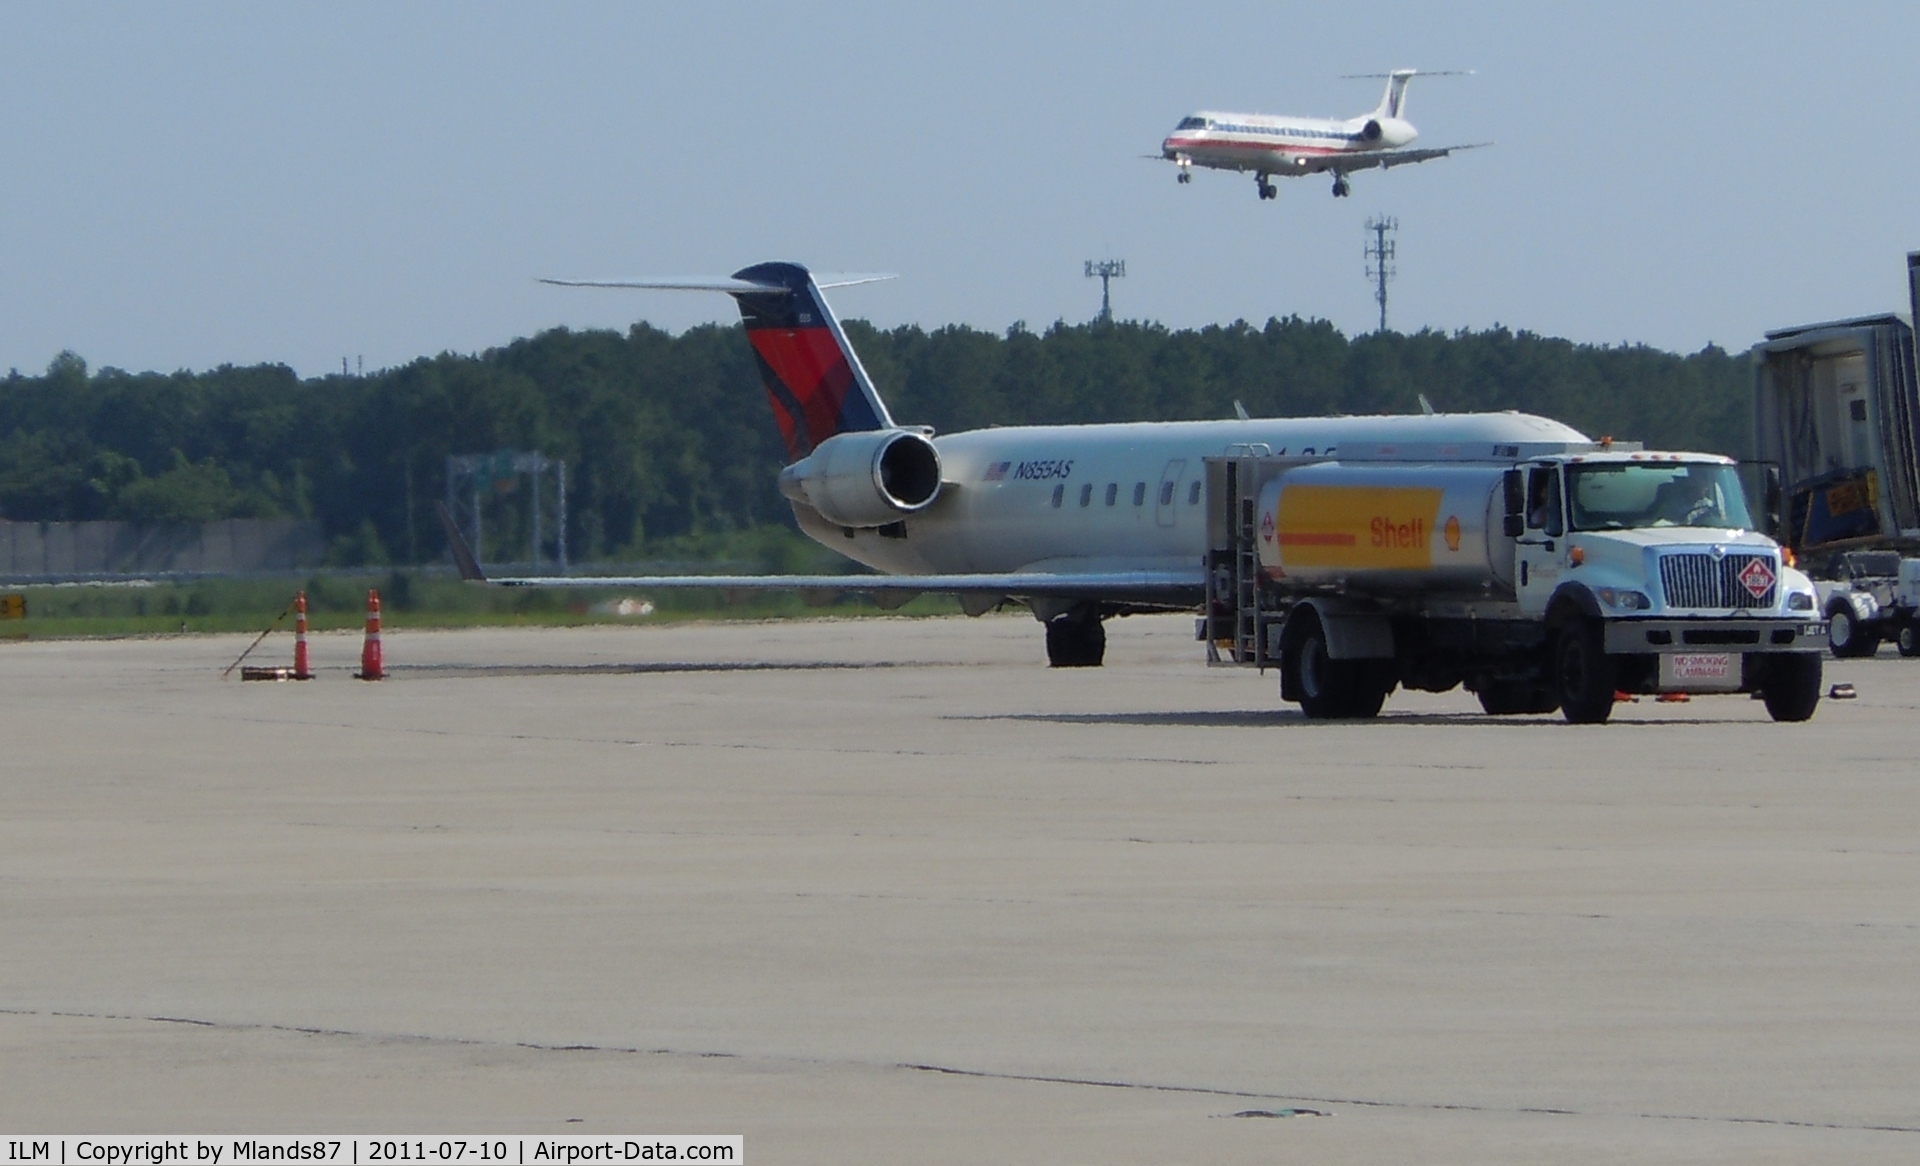 Wilmington International Airport (ILM) - Embraer 135 Landing, CL 600 at the gate.